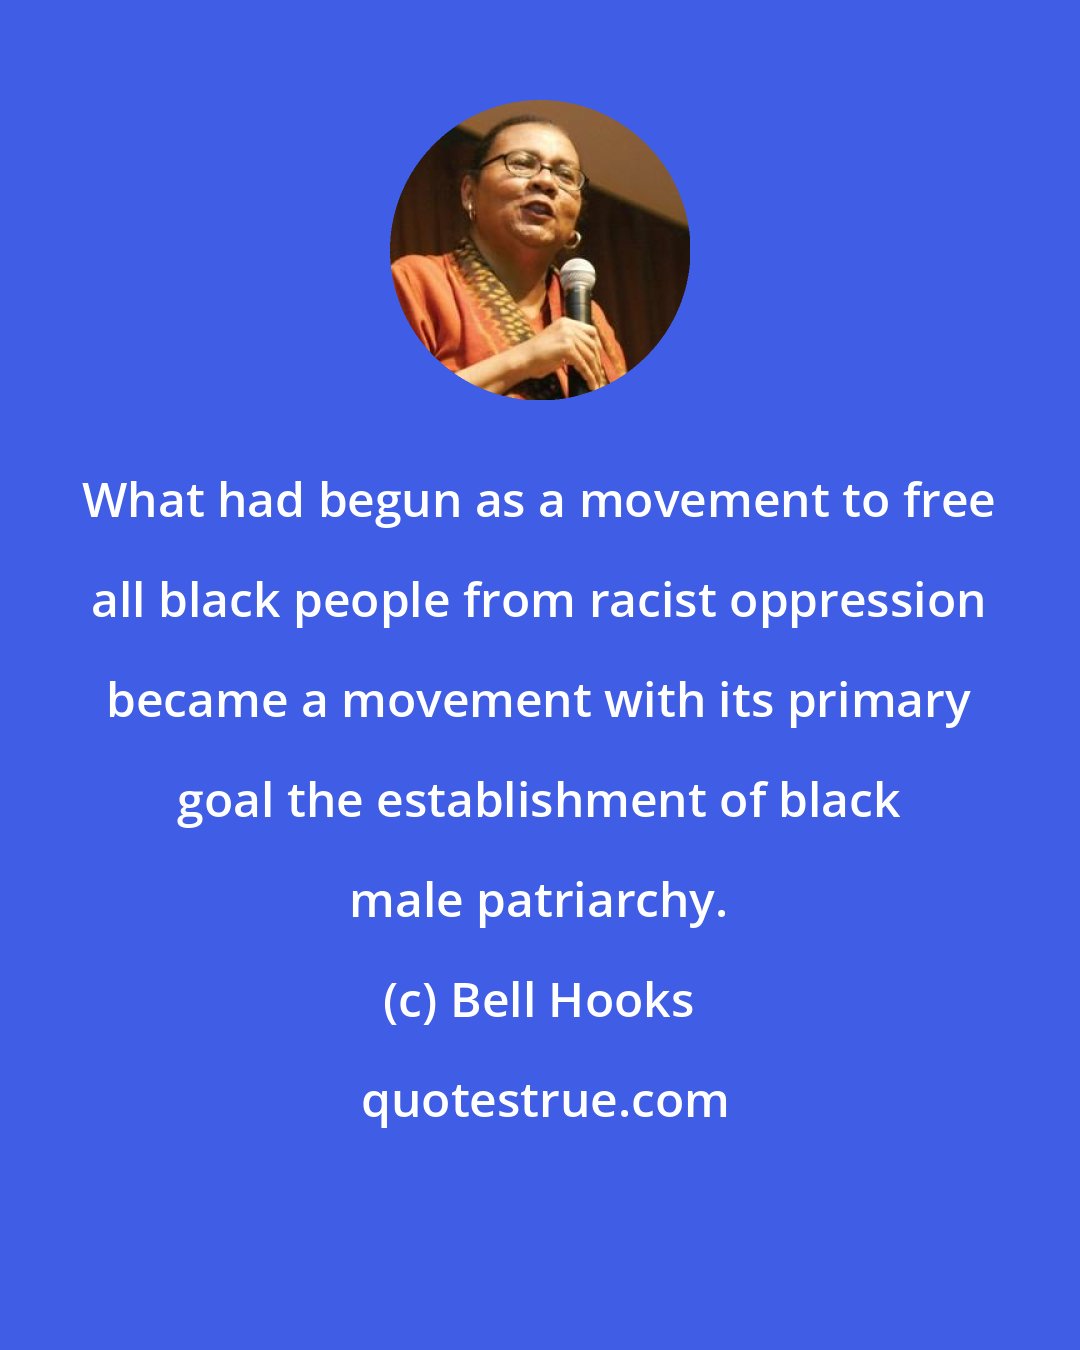 Bell Hooks: What had begun as a movement to free all black people from racist oppression became a movement with its primary goal the establishment of black male patriarchy.